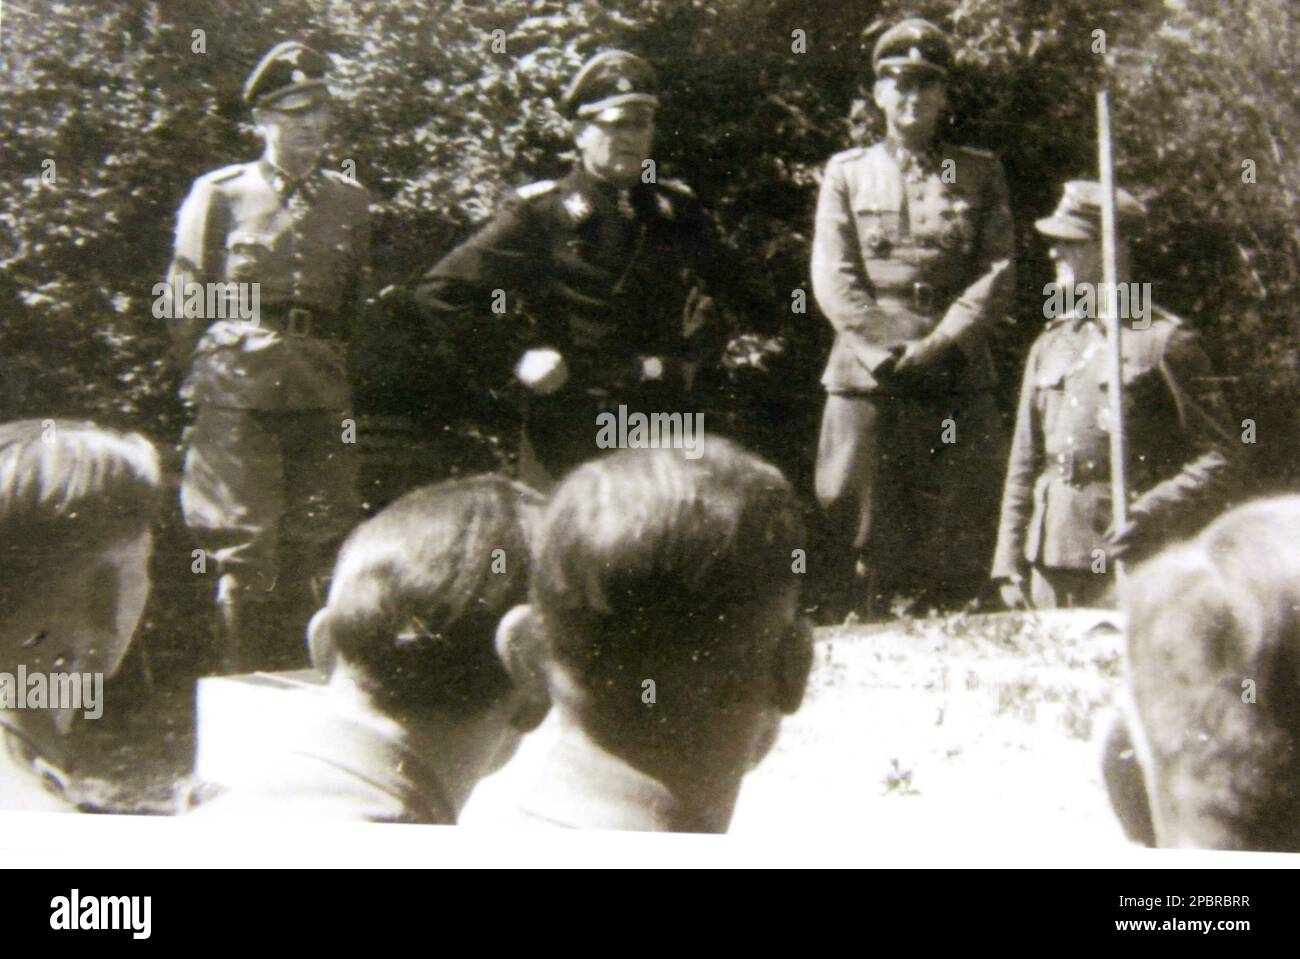 World War Two B&W photo Senior Waffen SS Officers ,Sepp Dietrich , and Albert Frey on the right on the left is I think Otto Kumm this photo is from a Veterans personal collection Stock Photo